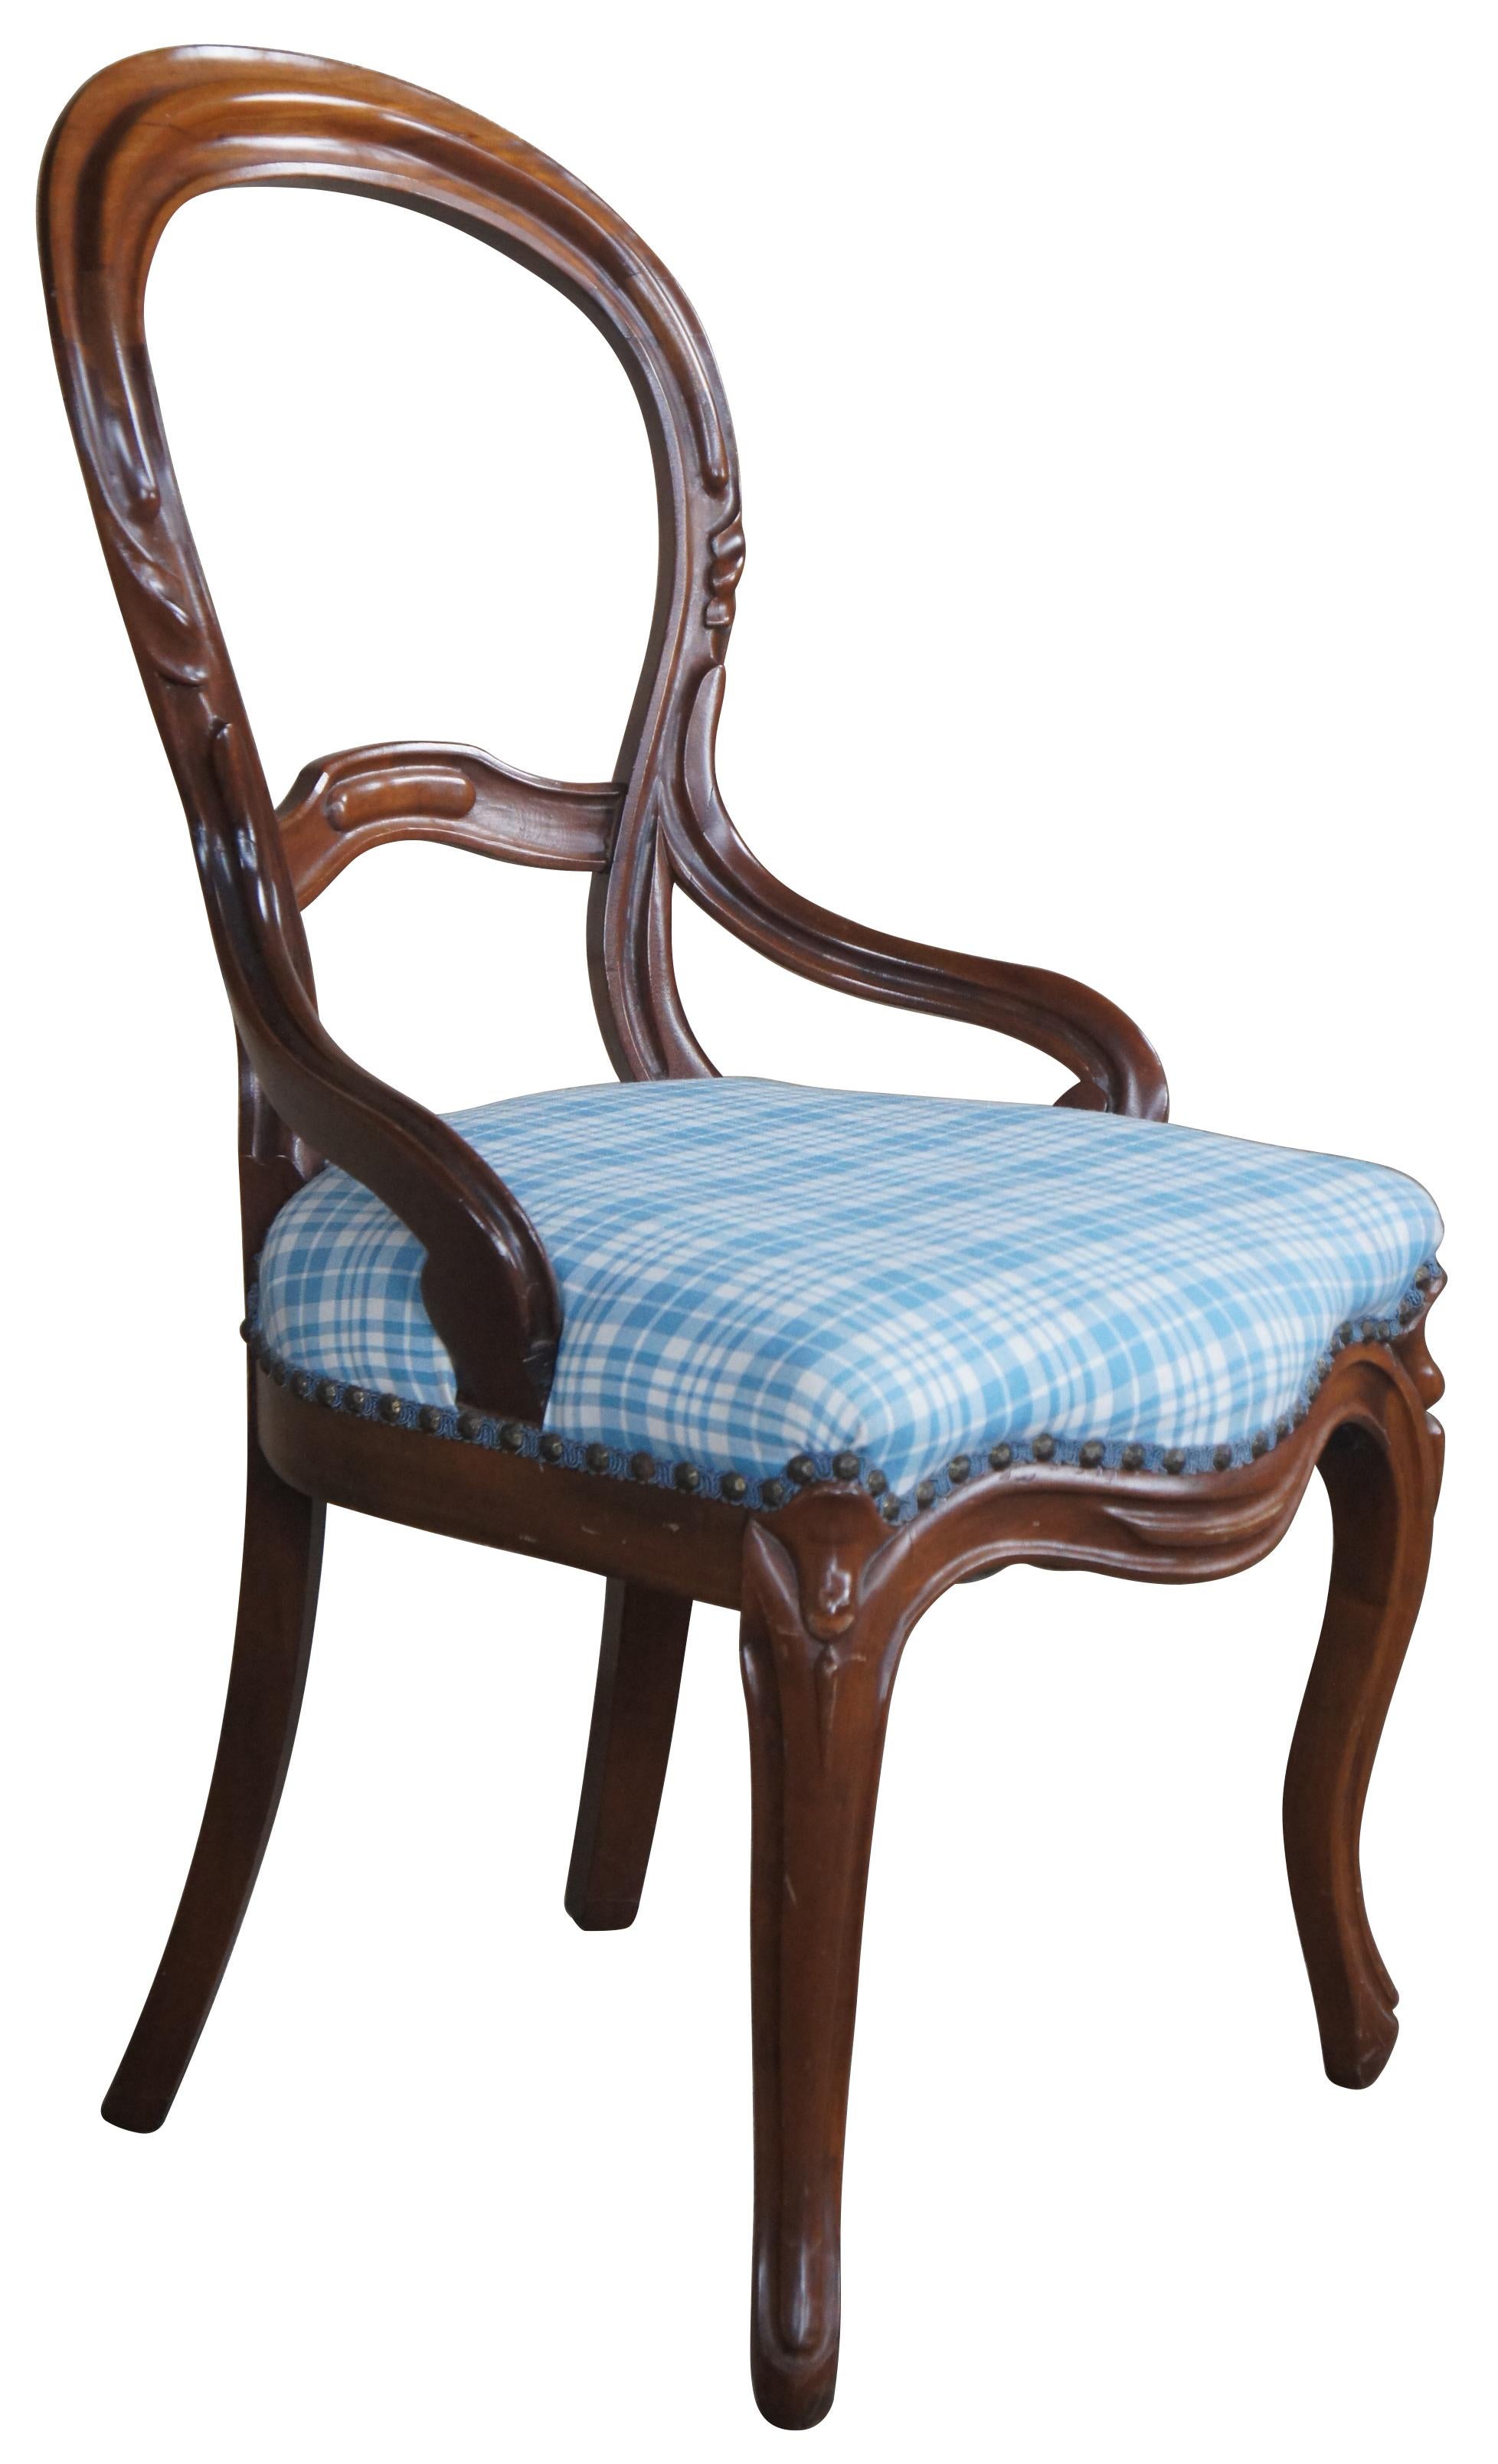 Late Victorian era mahogany balloon back side chair. Features a nicely shaped back with carved accents leading to scrolled arms and a plaid seat with nailhead trim.
 